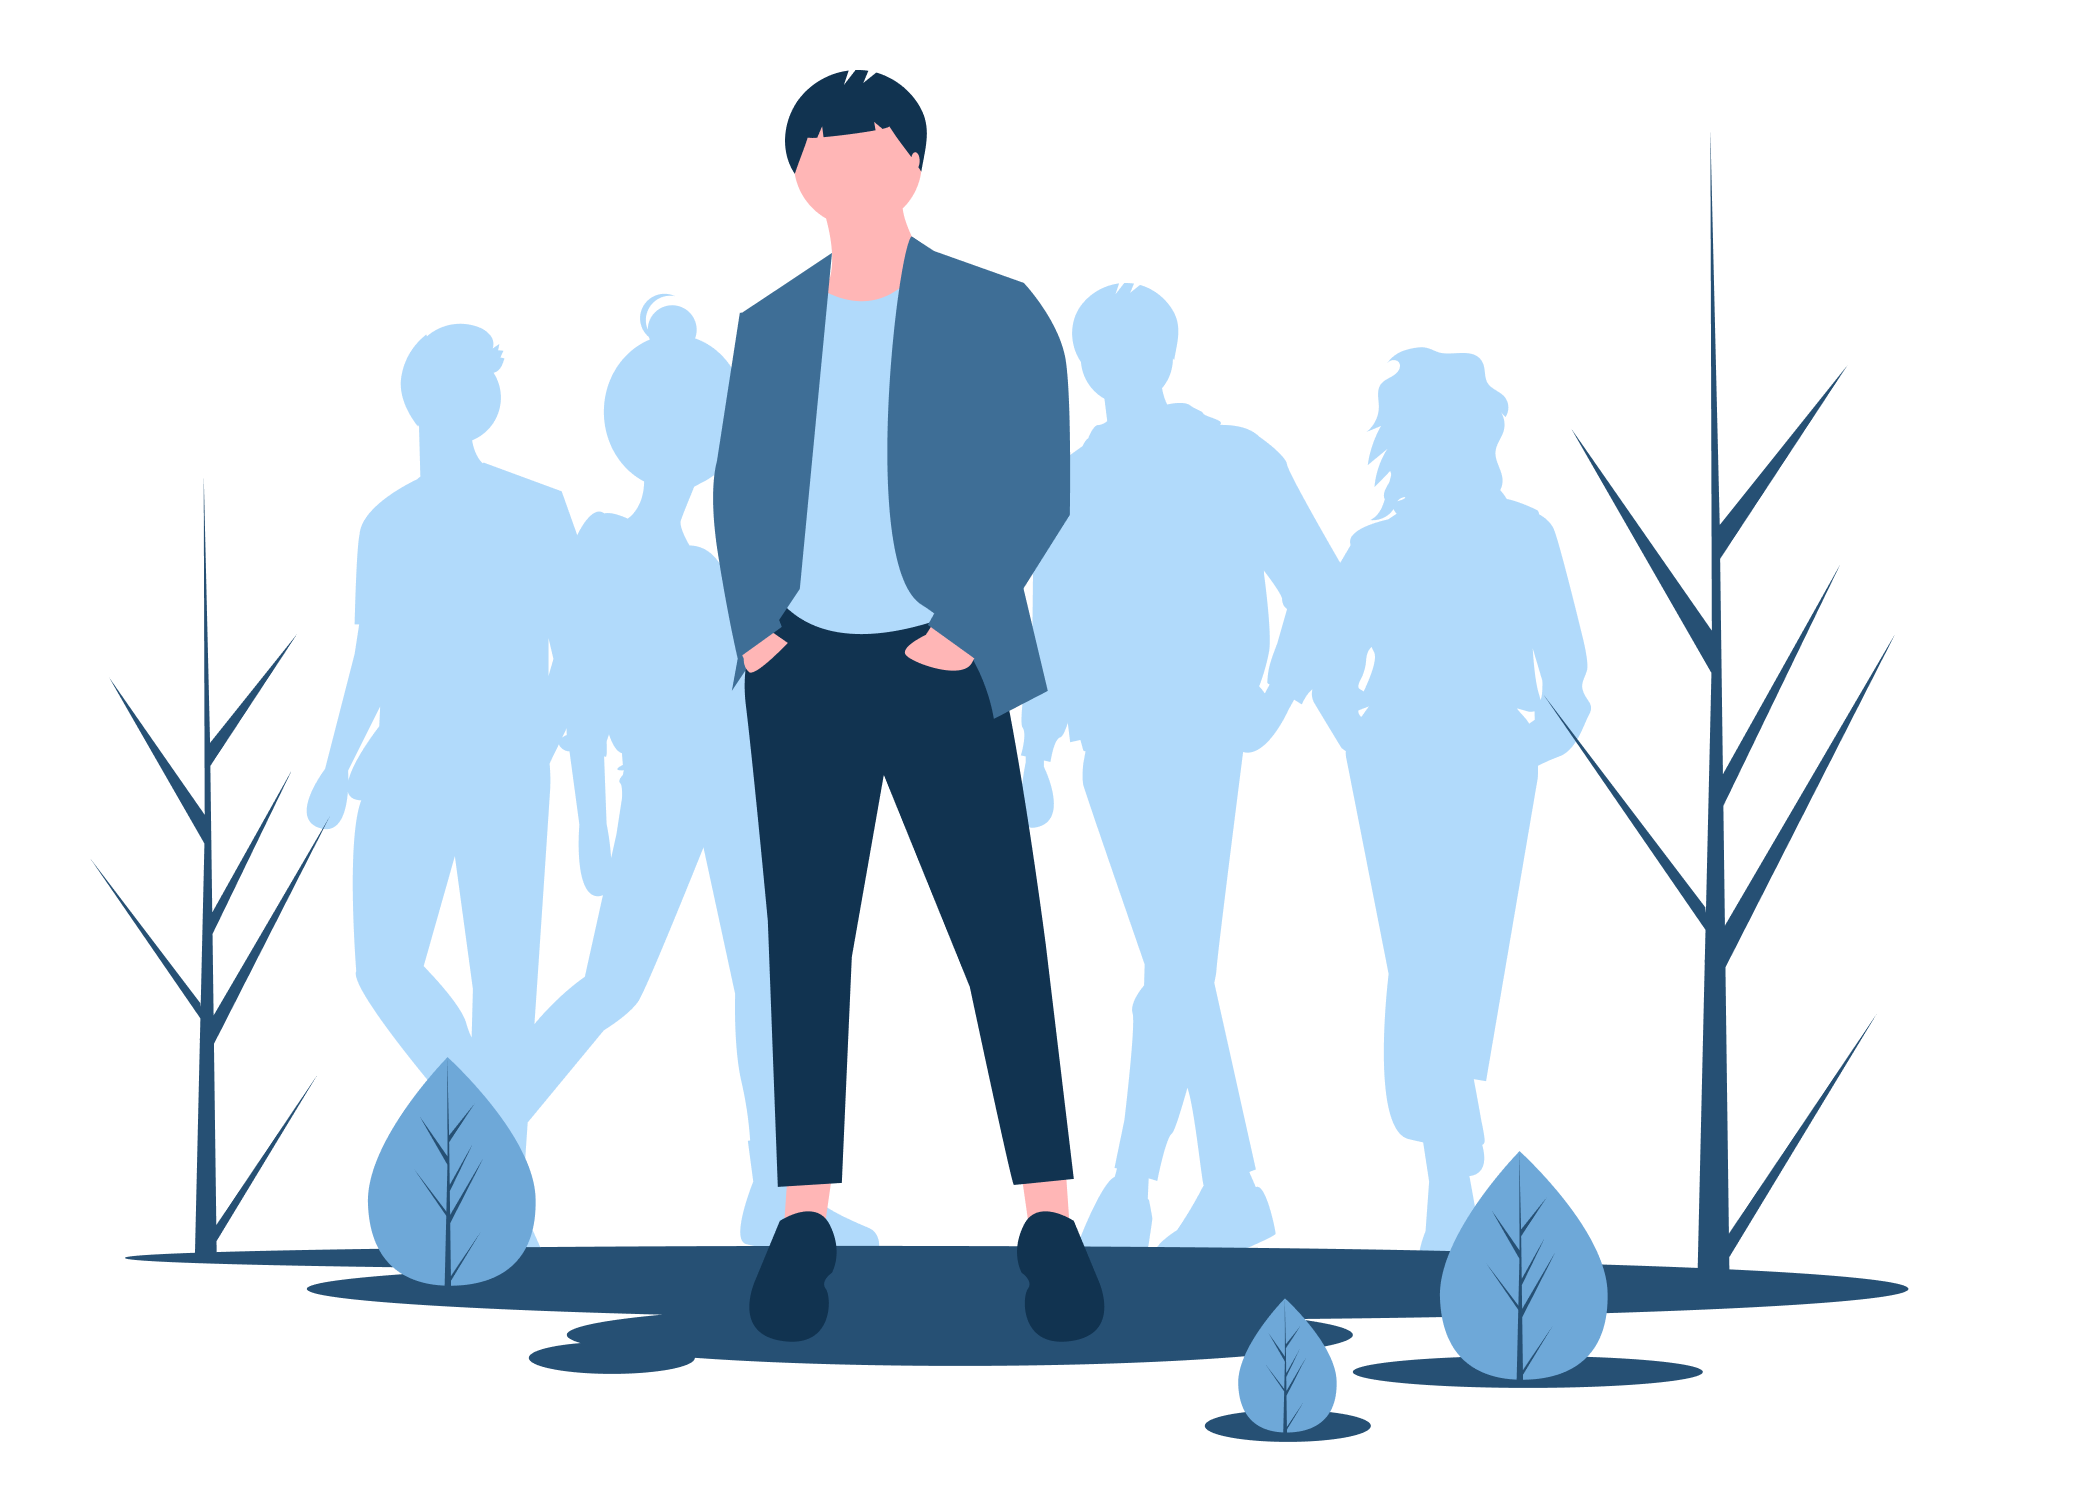 Illustration of a figure standing out amongst other figures in the background